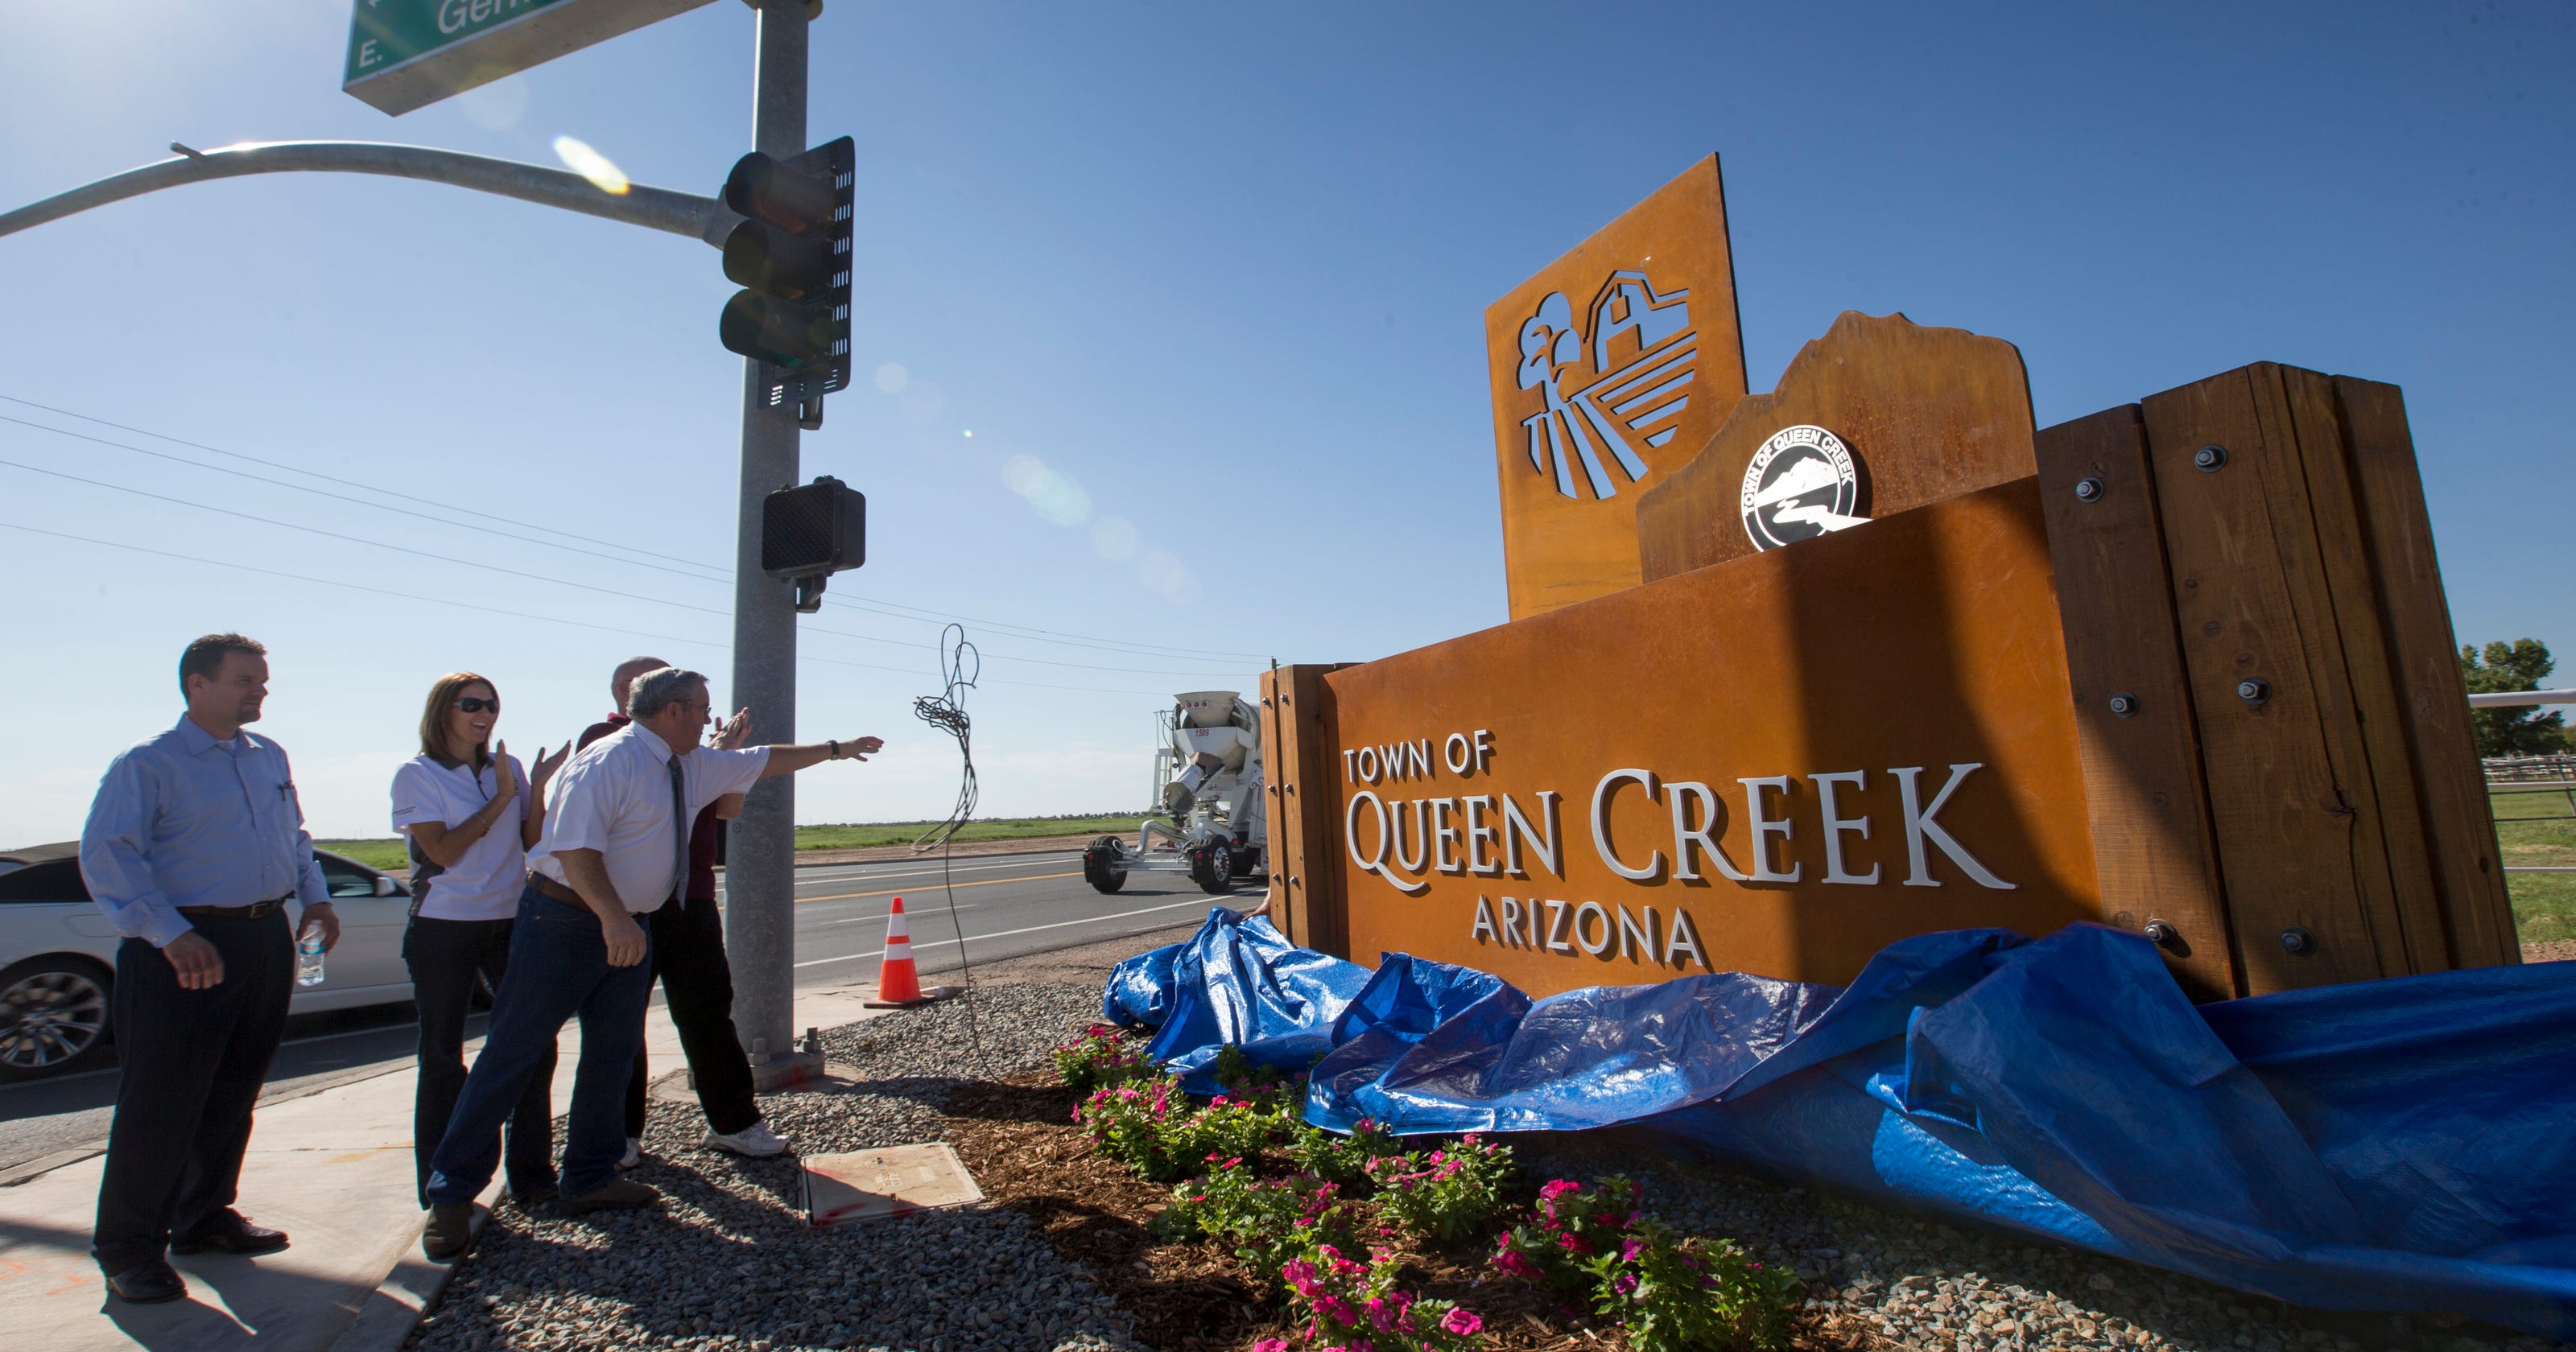 Queen Creek celebrates 25 years with new sign, events